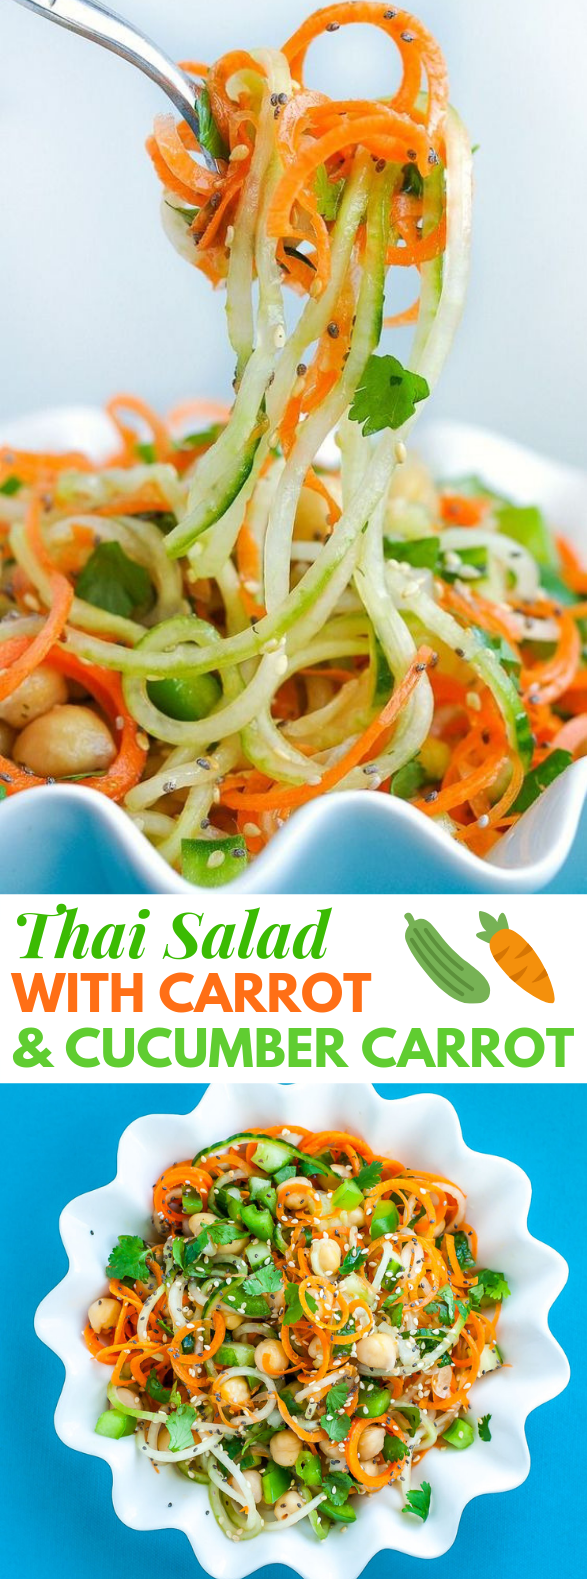 THAI SALAD WITH CARROT AND CUCUMBER NOODLES #Vegetarian #DeliciousRecipe